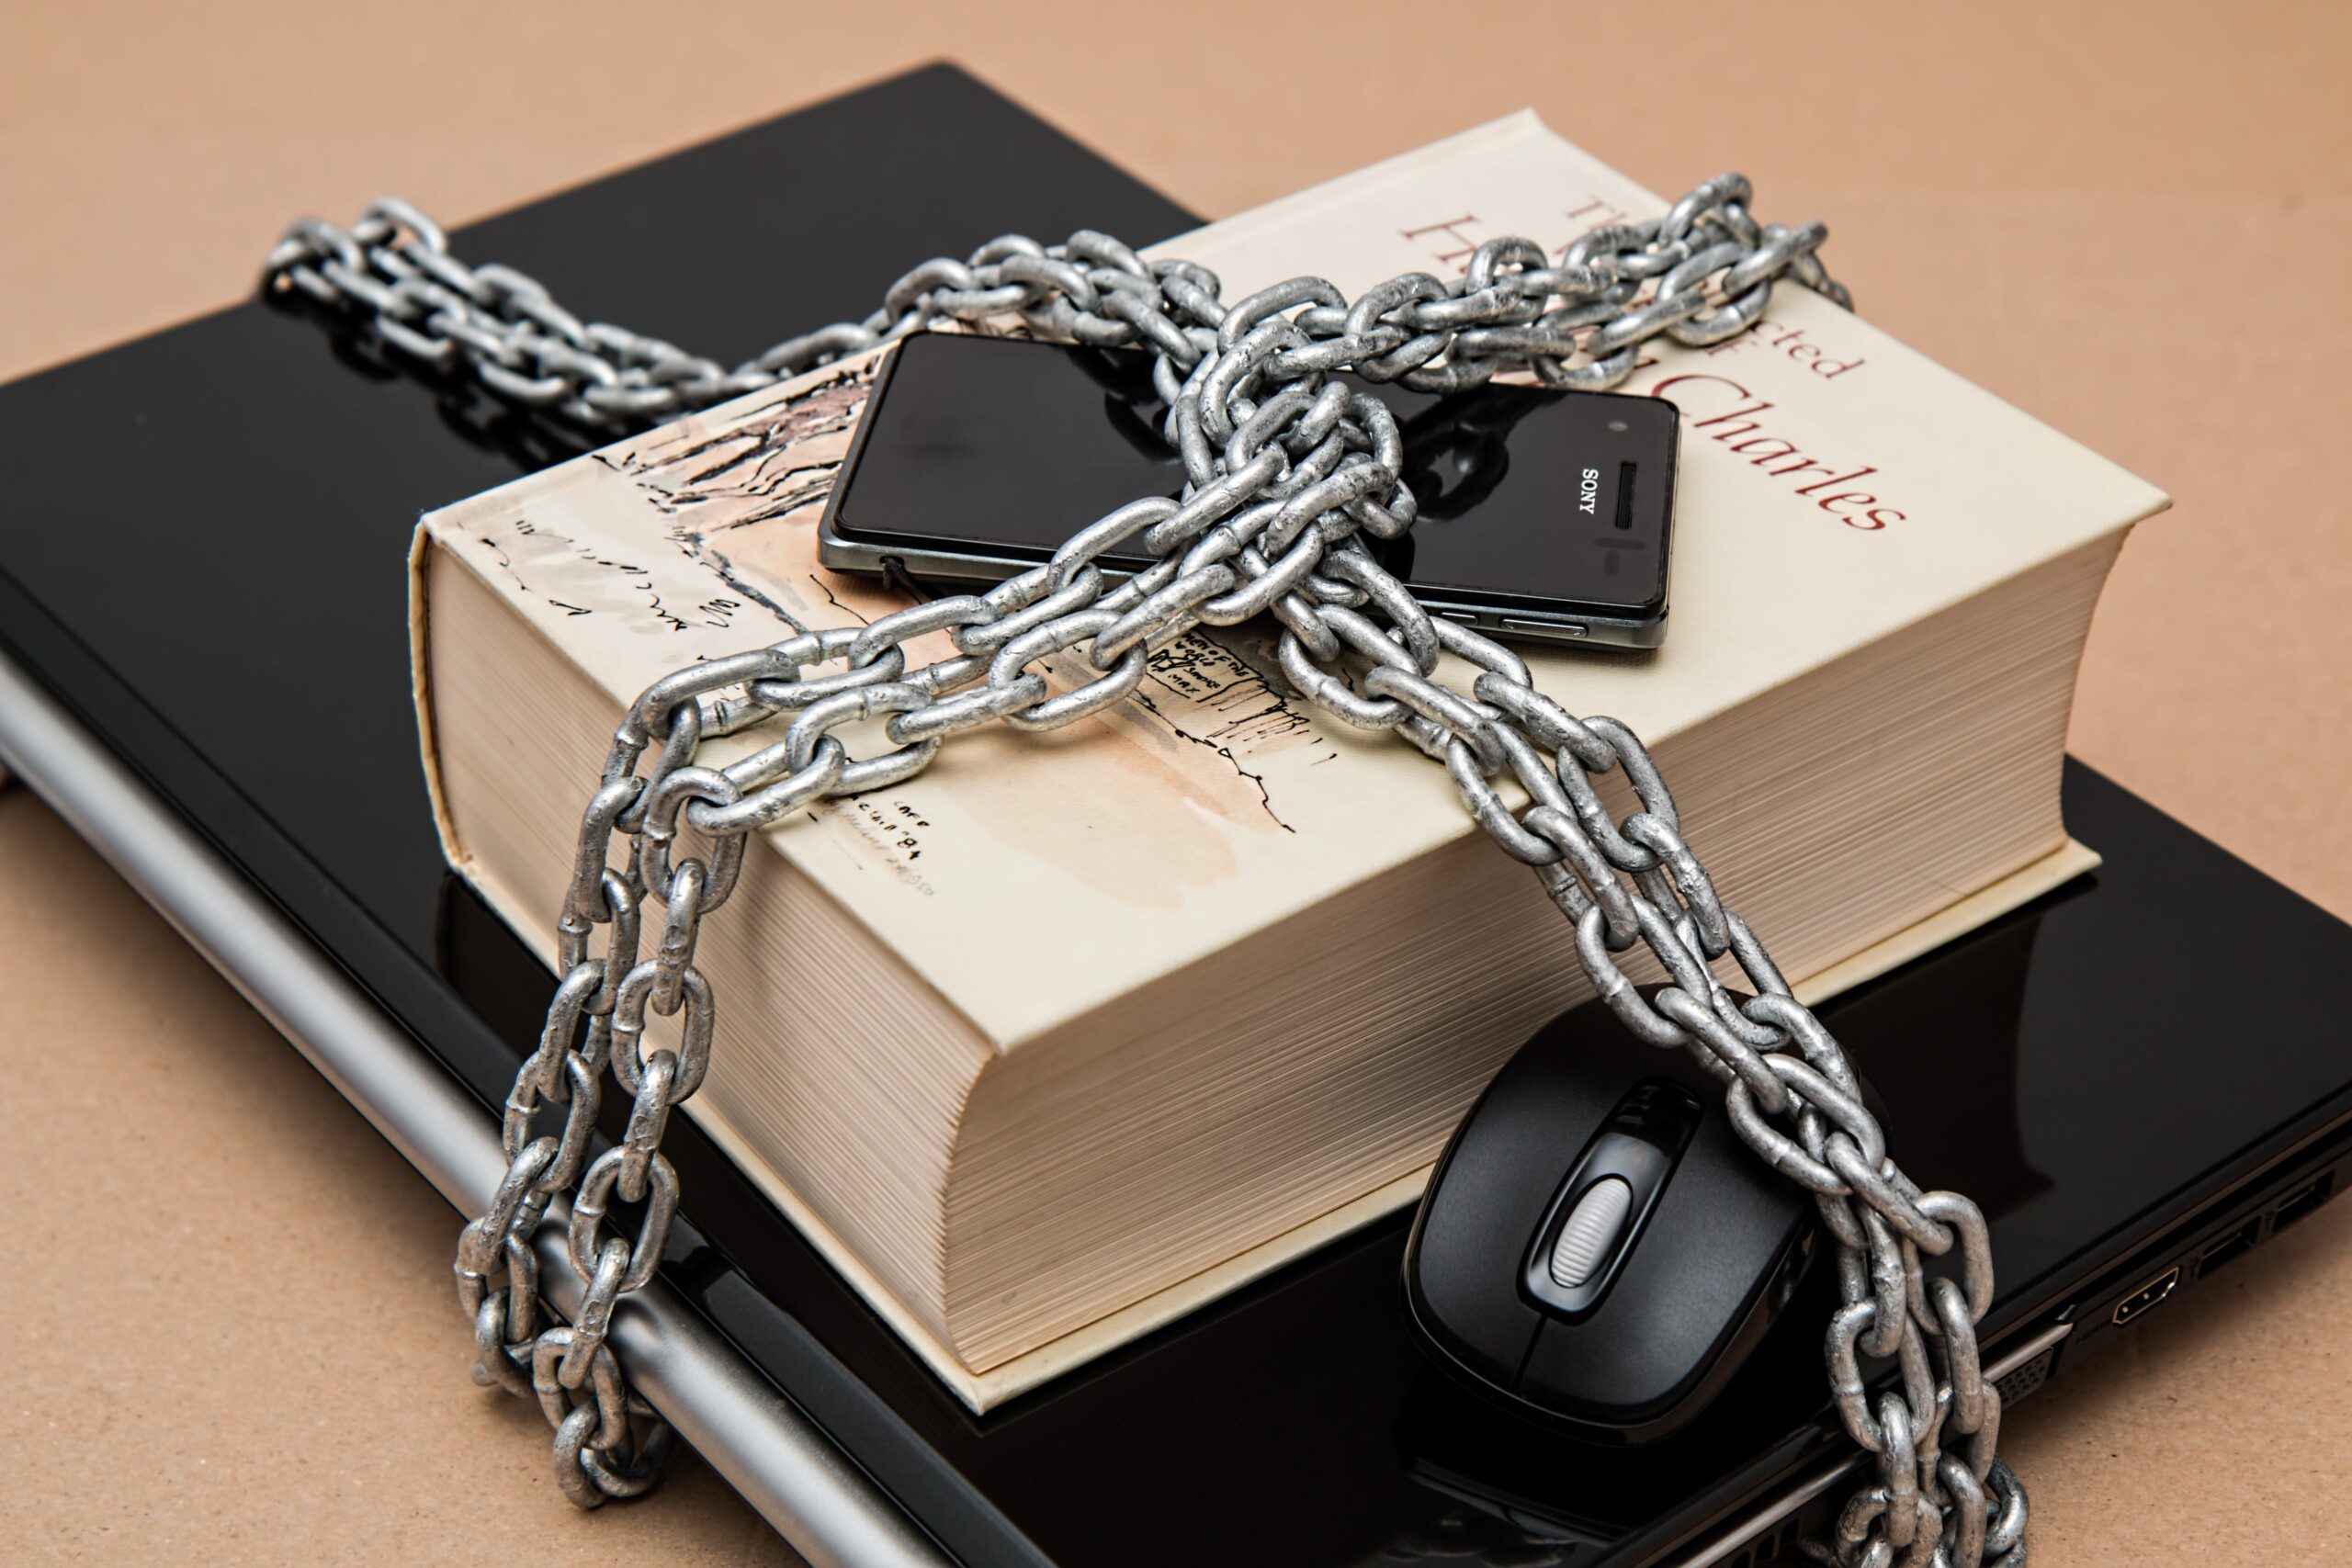 A computer, computer mouse, book, and phone are secured by a large chain.